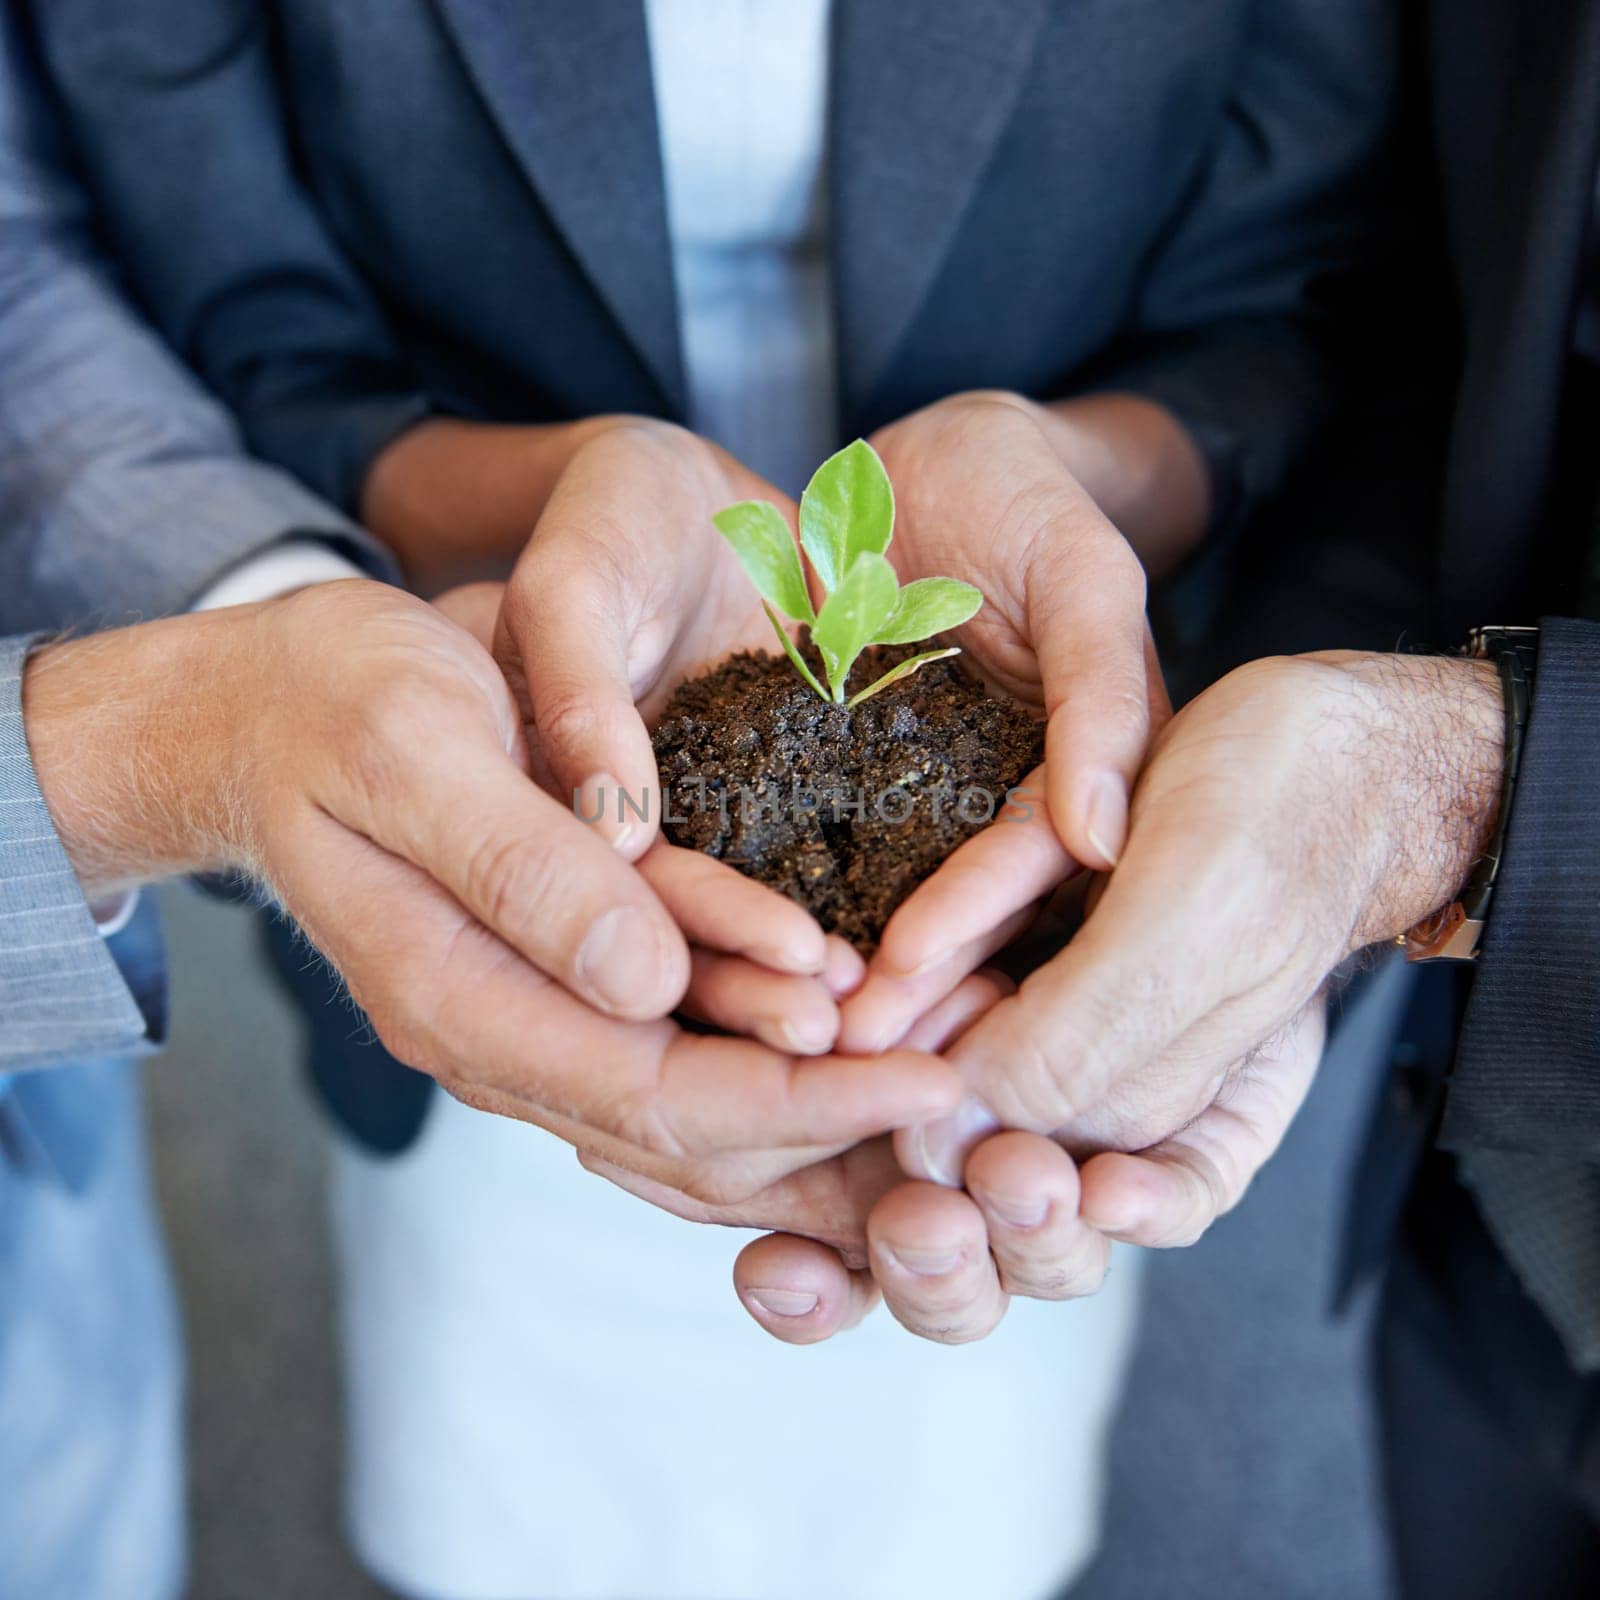 Hands, business people or group with seedling, plant or together for support, helping hand and trust in office. Men, women and sustainable startup with soil, solidarity and teamwork for development by YuriArcurs